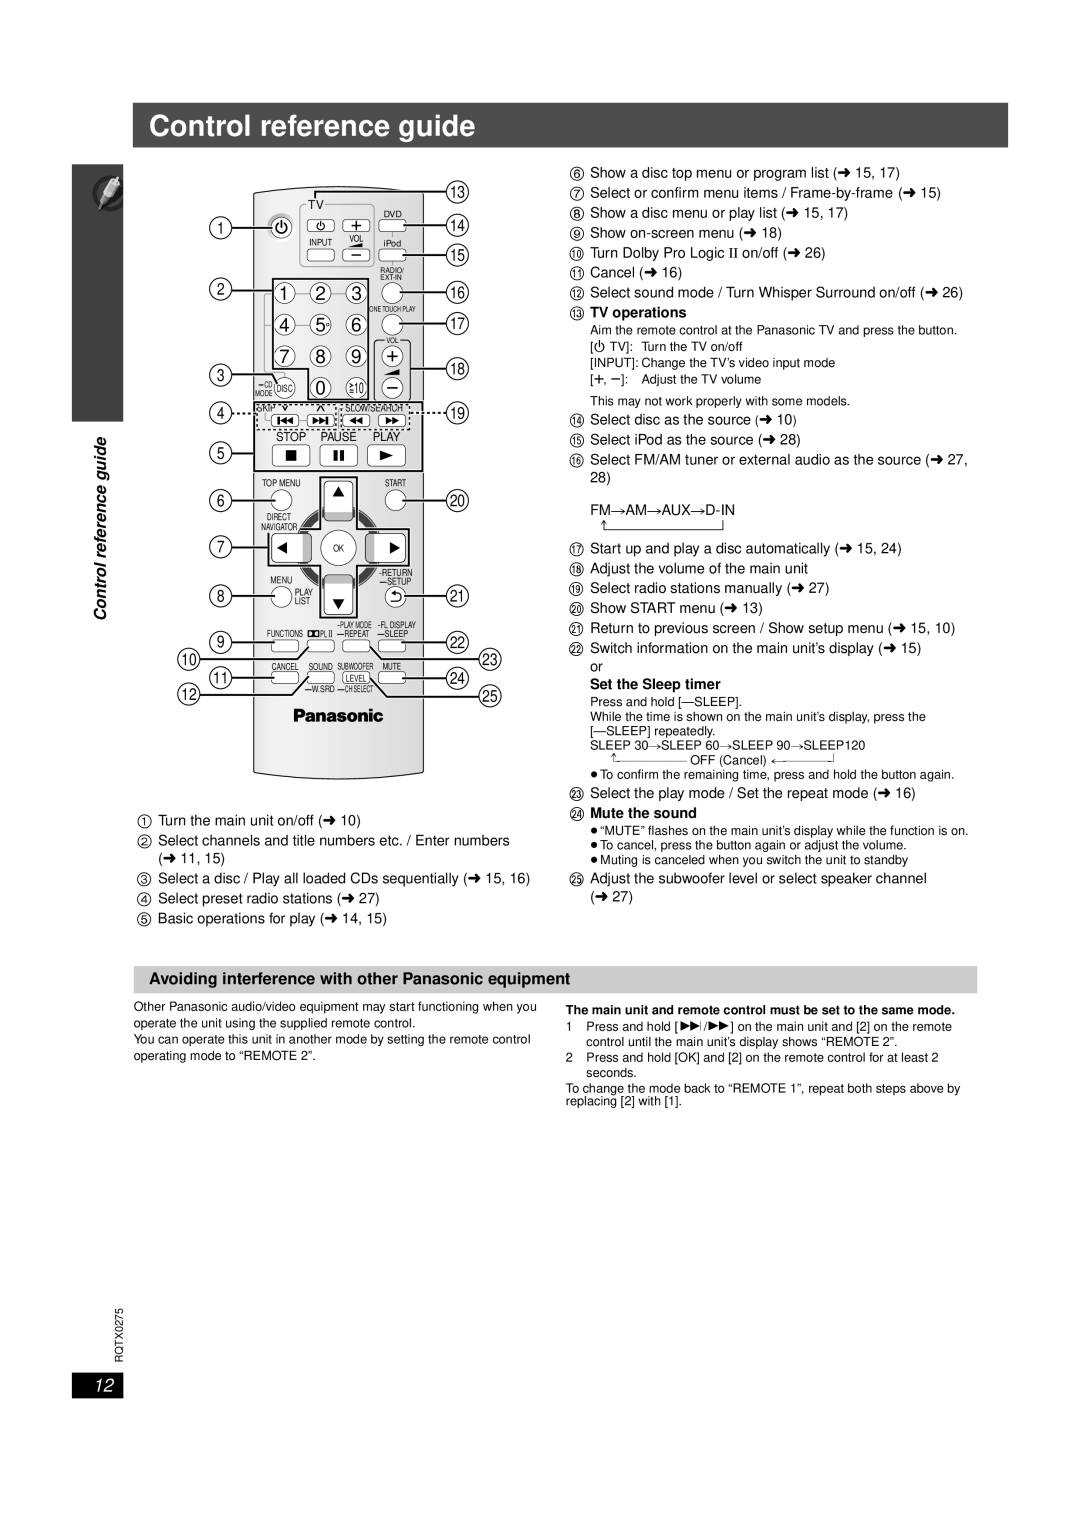 Panasonic SC-PT665 manual Control reference guide 